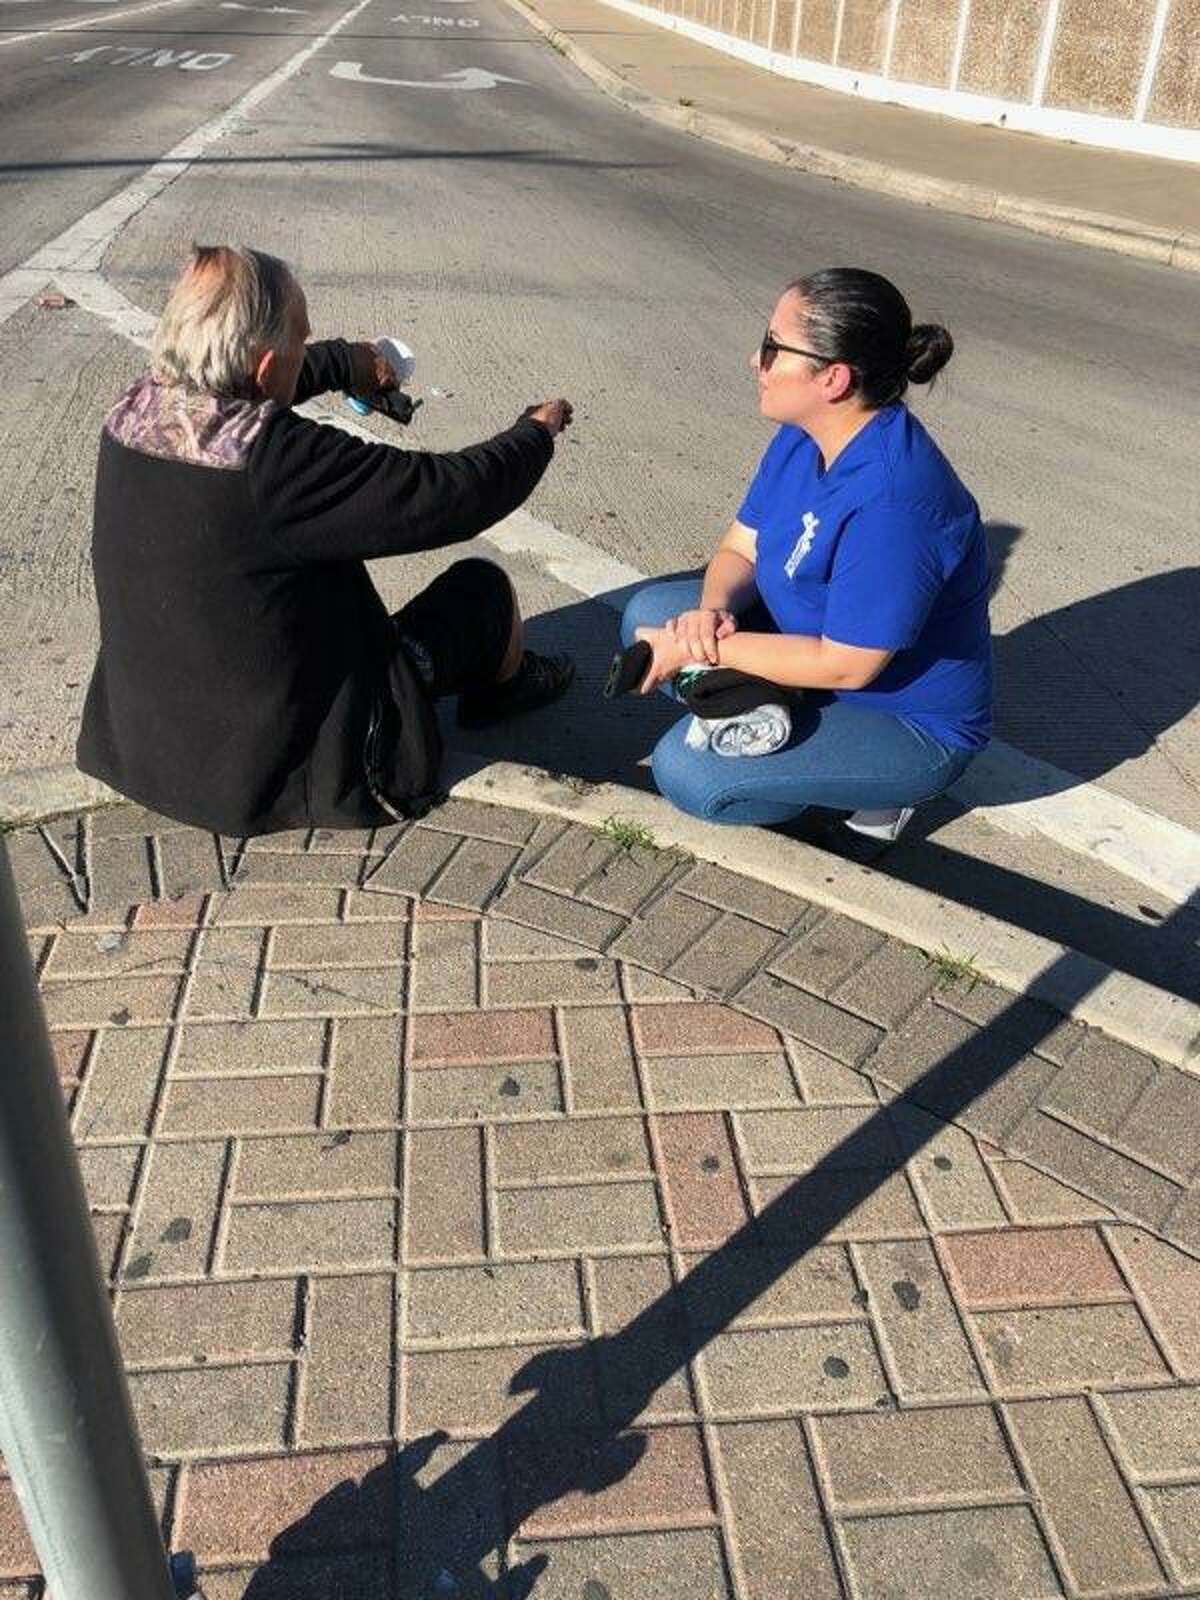 Bethany House outreach specialists hit the streets, so they can find vunerable homeless people and provide them with bottled waters, sunscreen and other items to cool off in the Laredo extreme heat as the propensity of them suffering heat strokes and other issues because of the heat grows as temperatures continue to rise. 